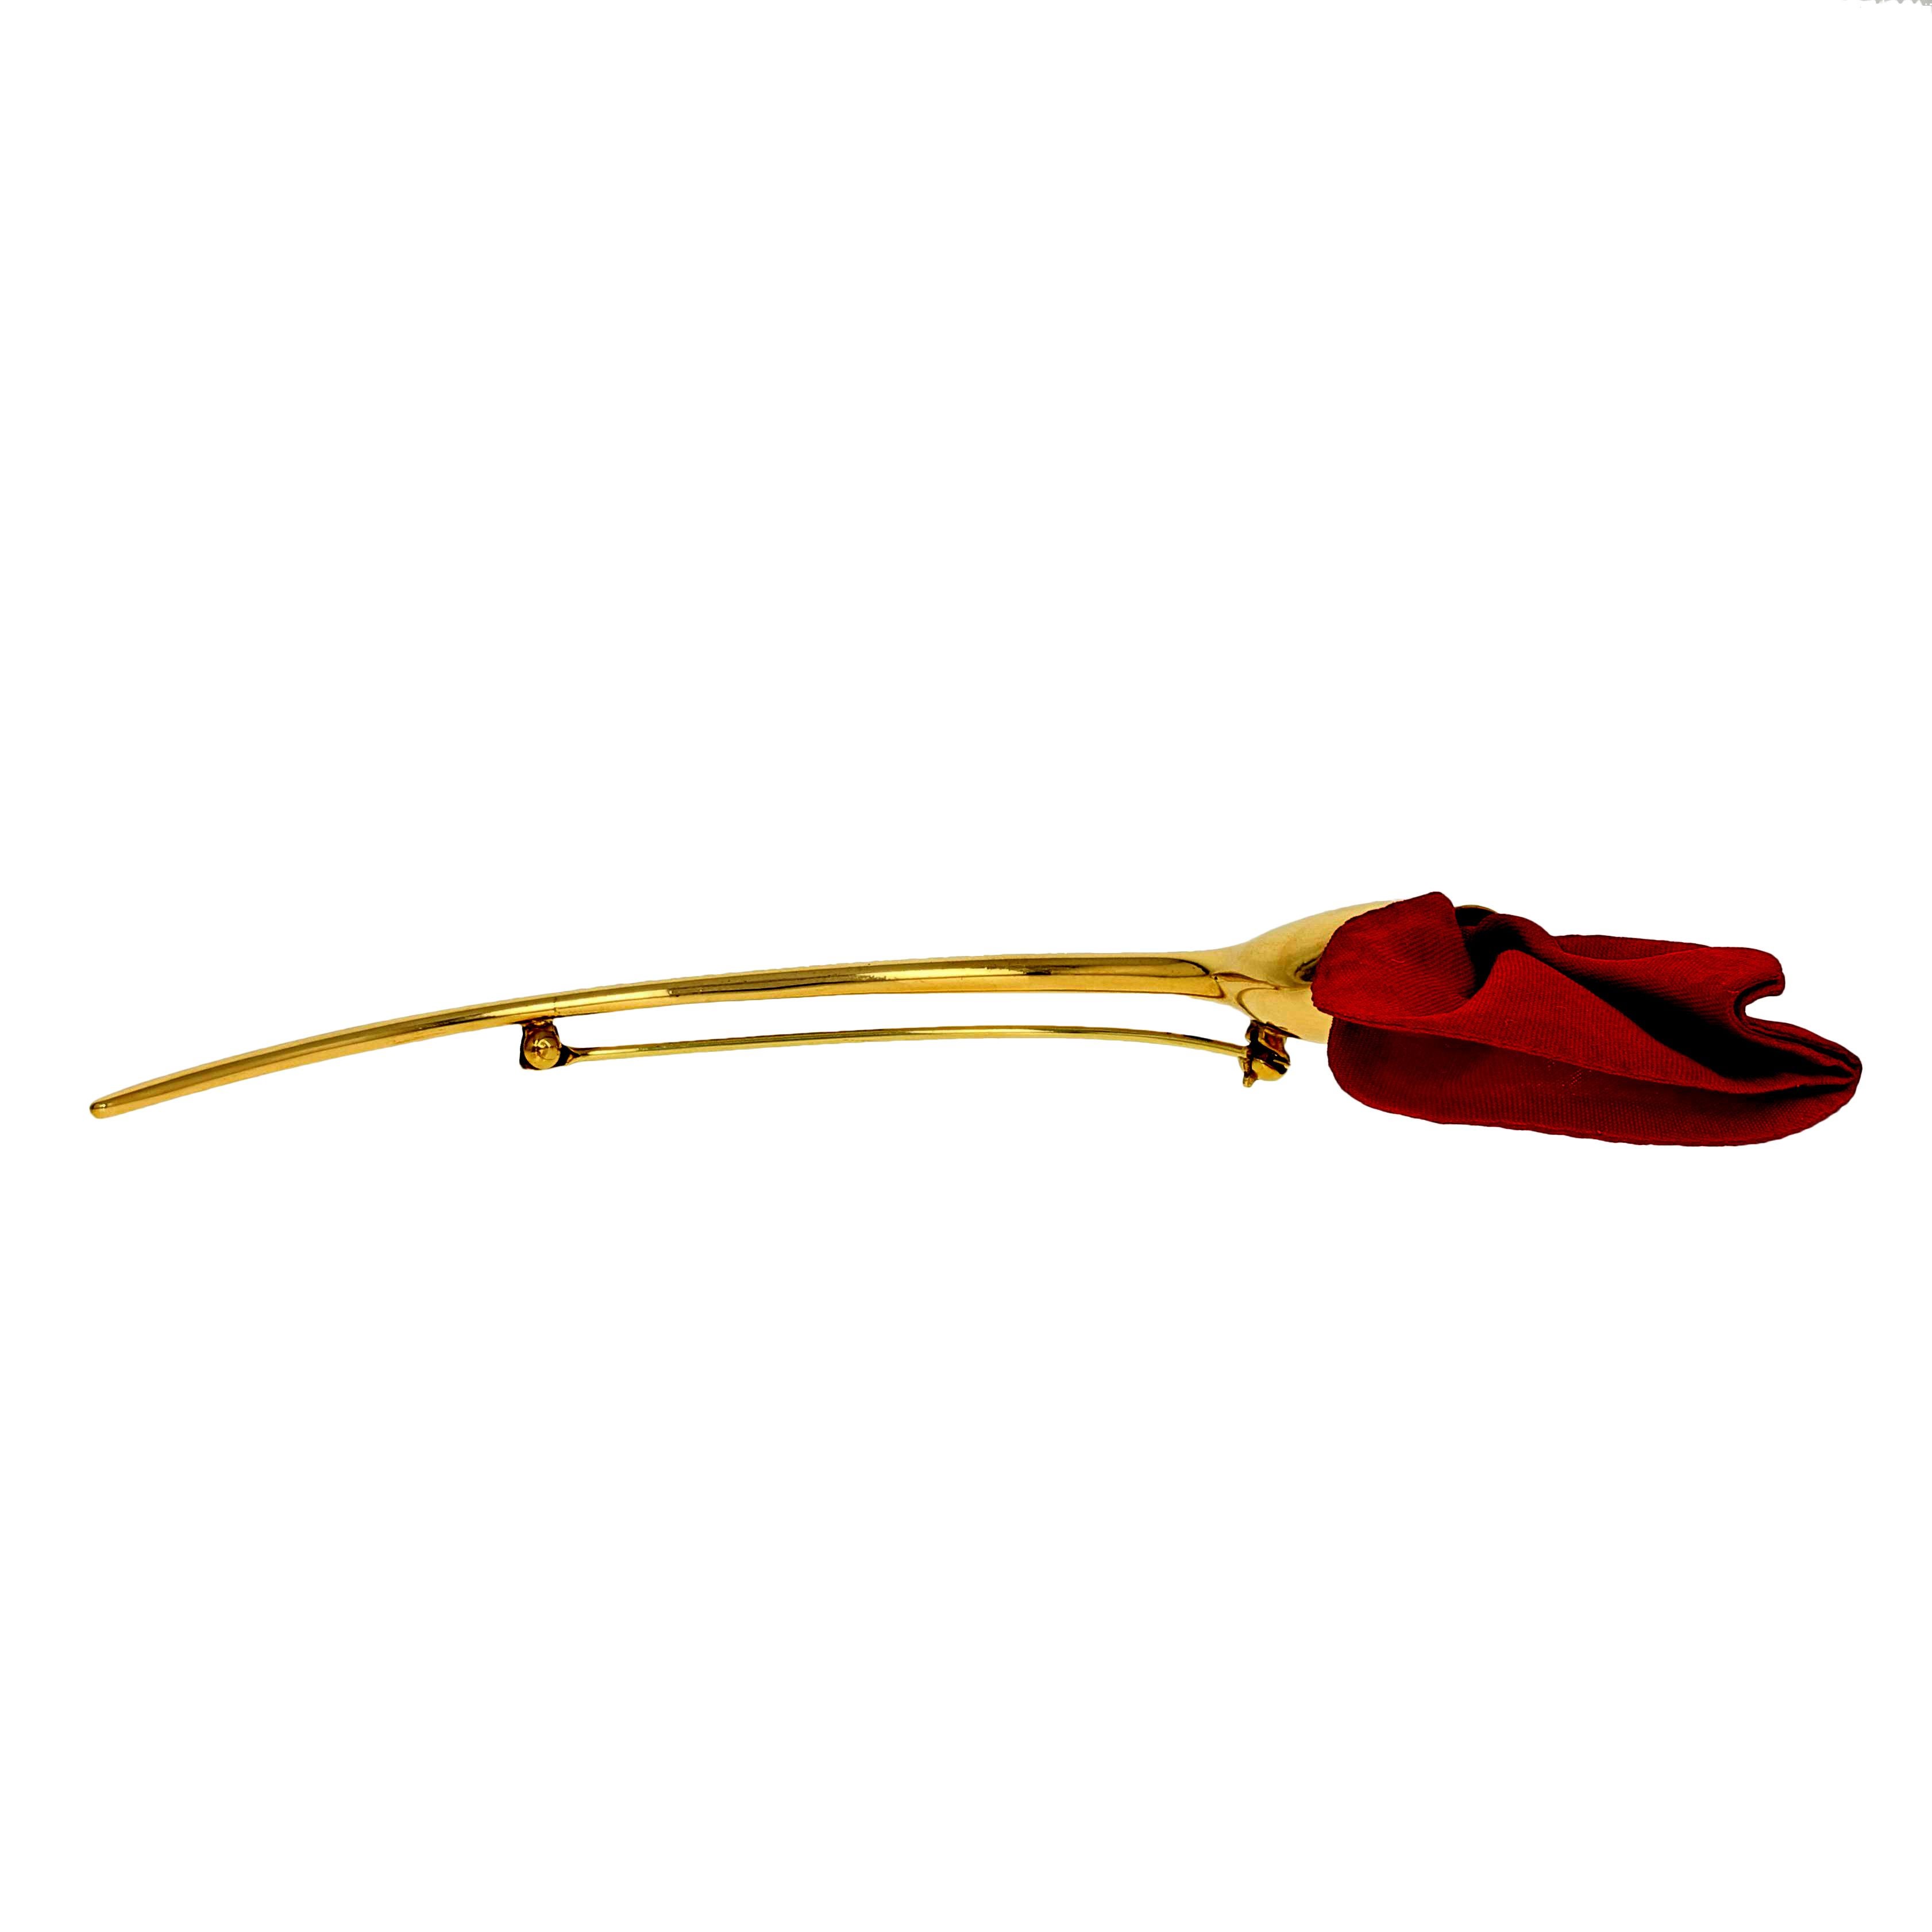 This Tiffany & Co. brooch is destined to become a signature piece in your jewelry collection! Beautifully designed by Elsa Peretti, this iconic Amapola pin is crafted in high purity 18k yellow gold highlighted by a vibrant red silk poppy blossom.